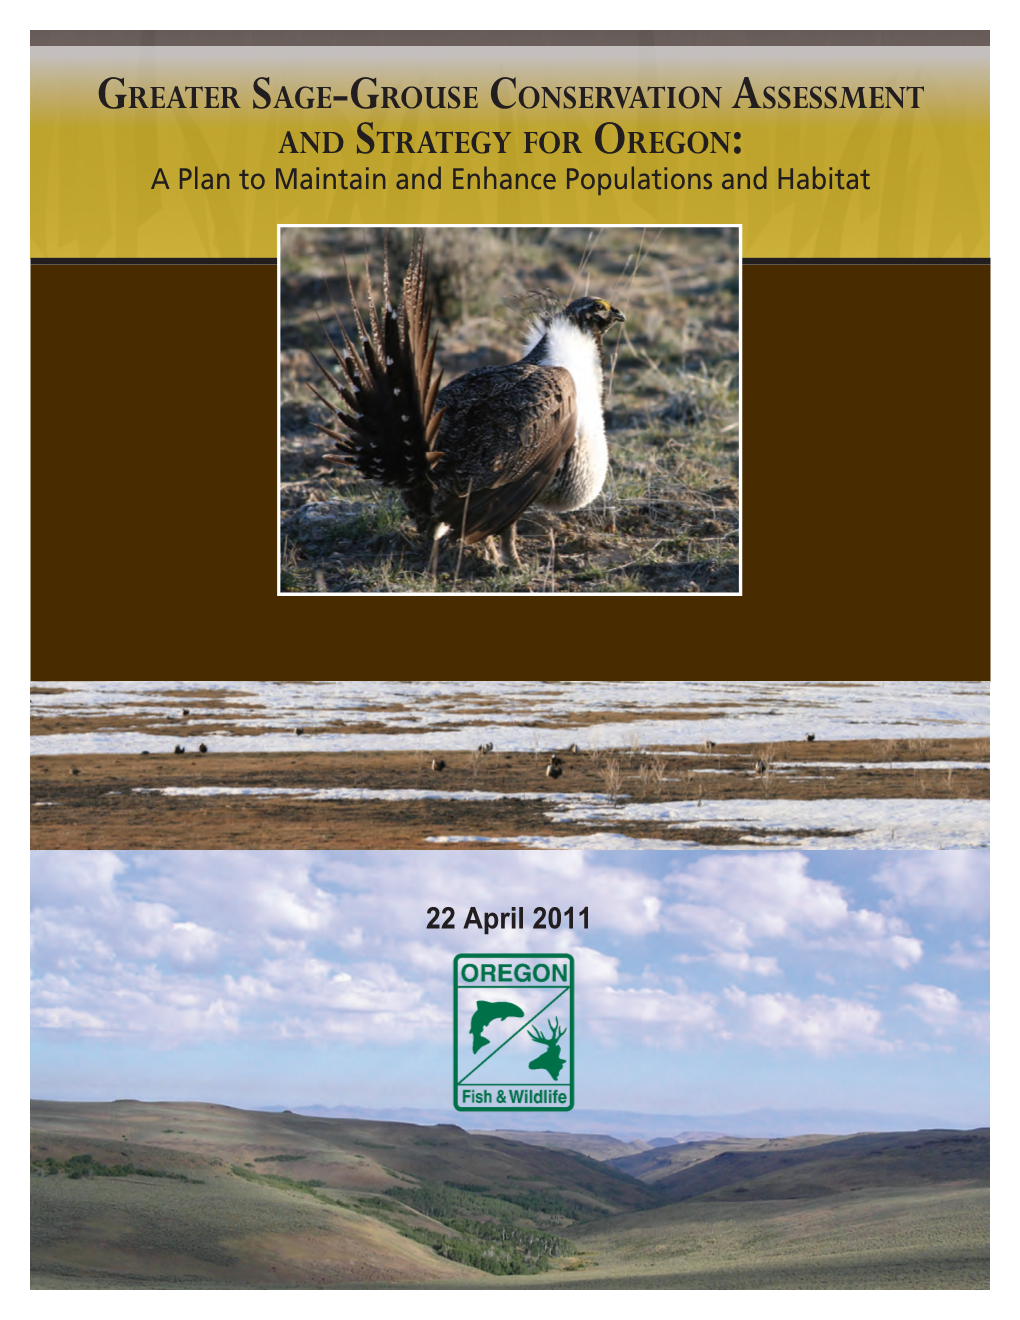 Greater Sage-Grouse Conservation Assessment and Strategy for Oregon: a Plan to Maintain and Enhance Populations and Habitat